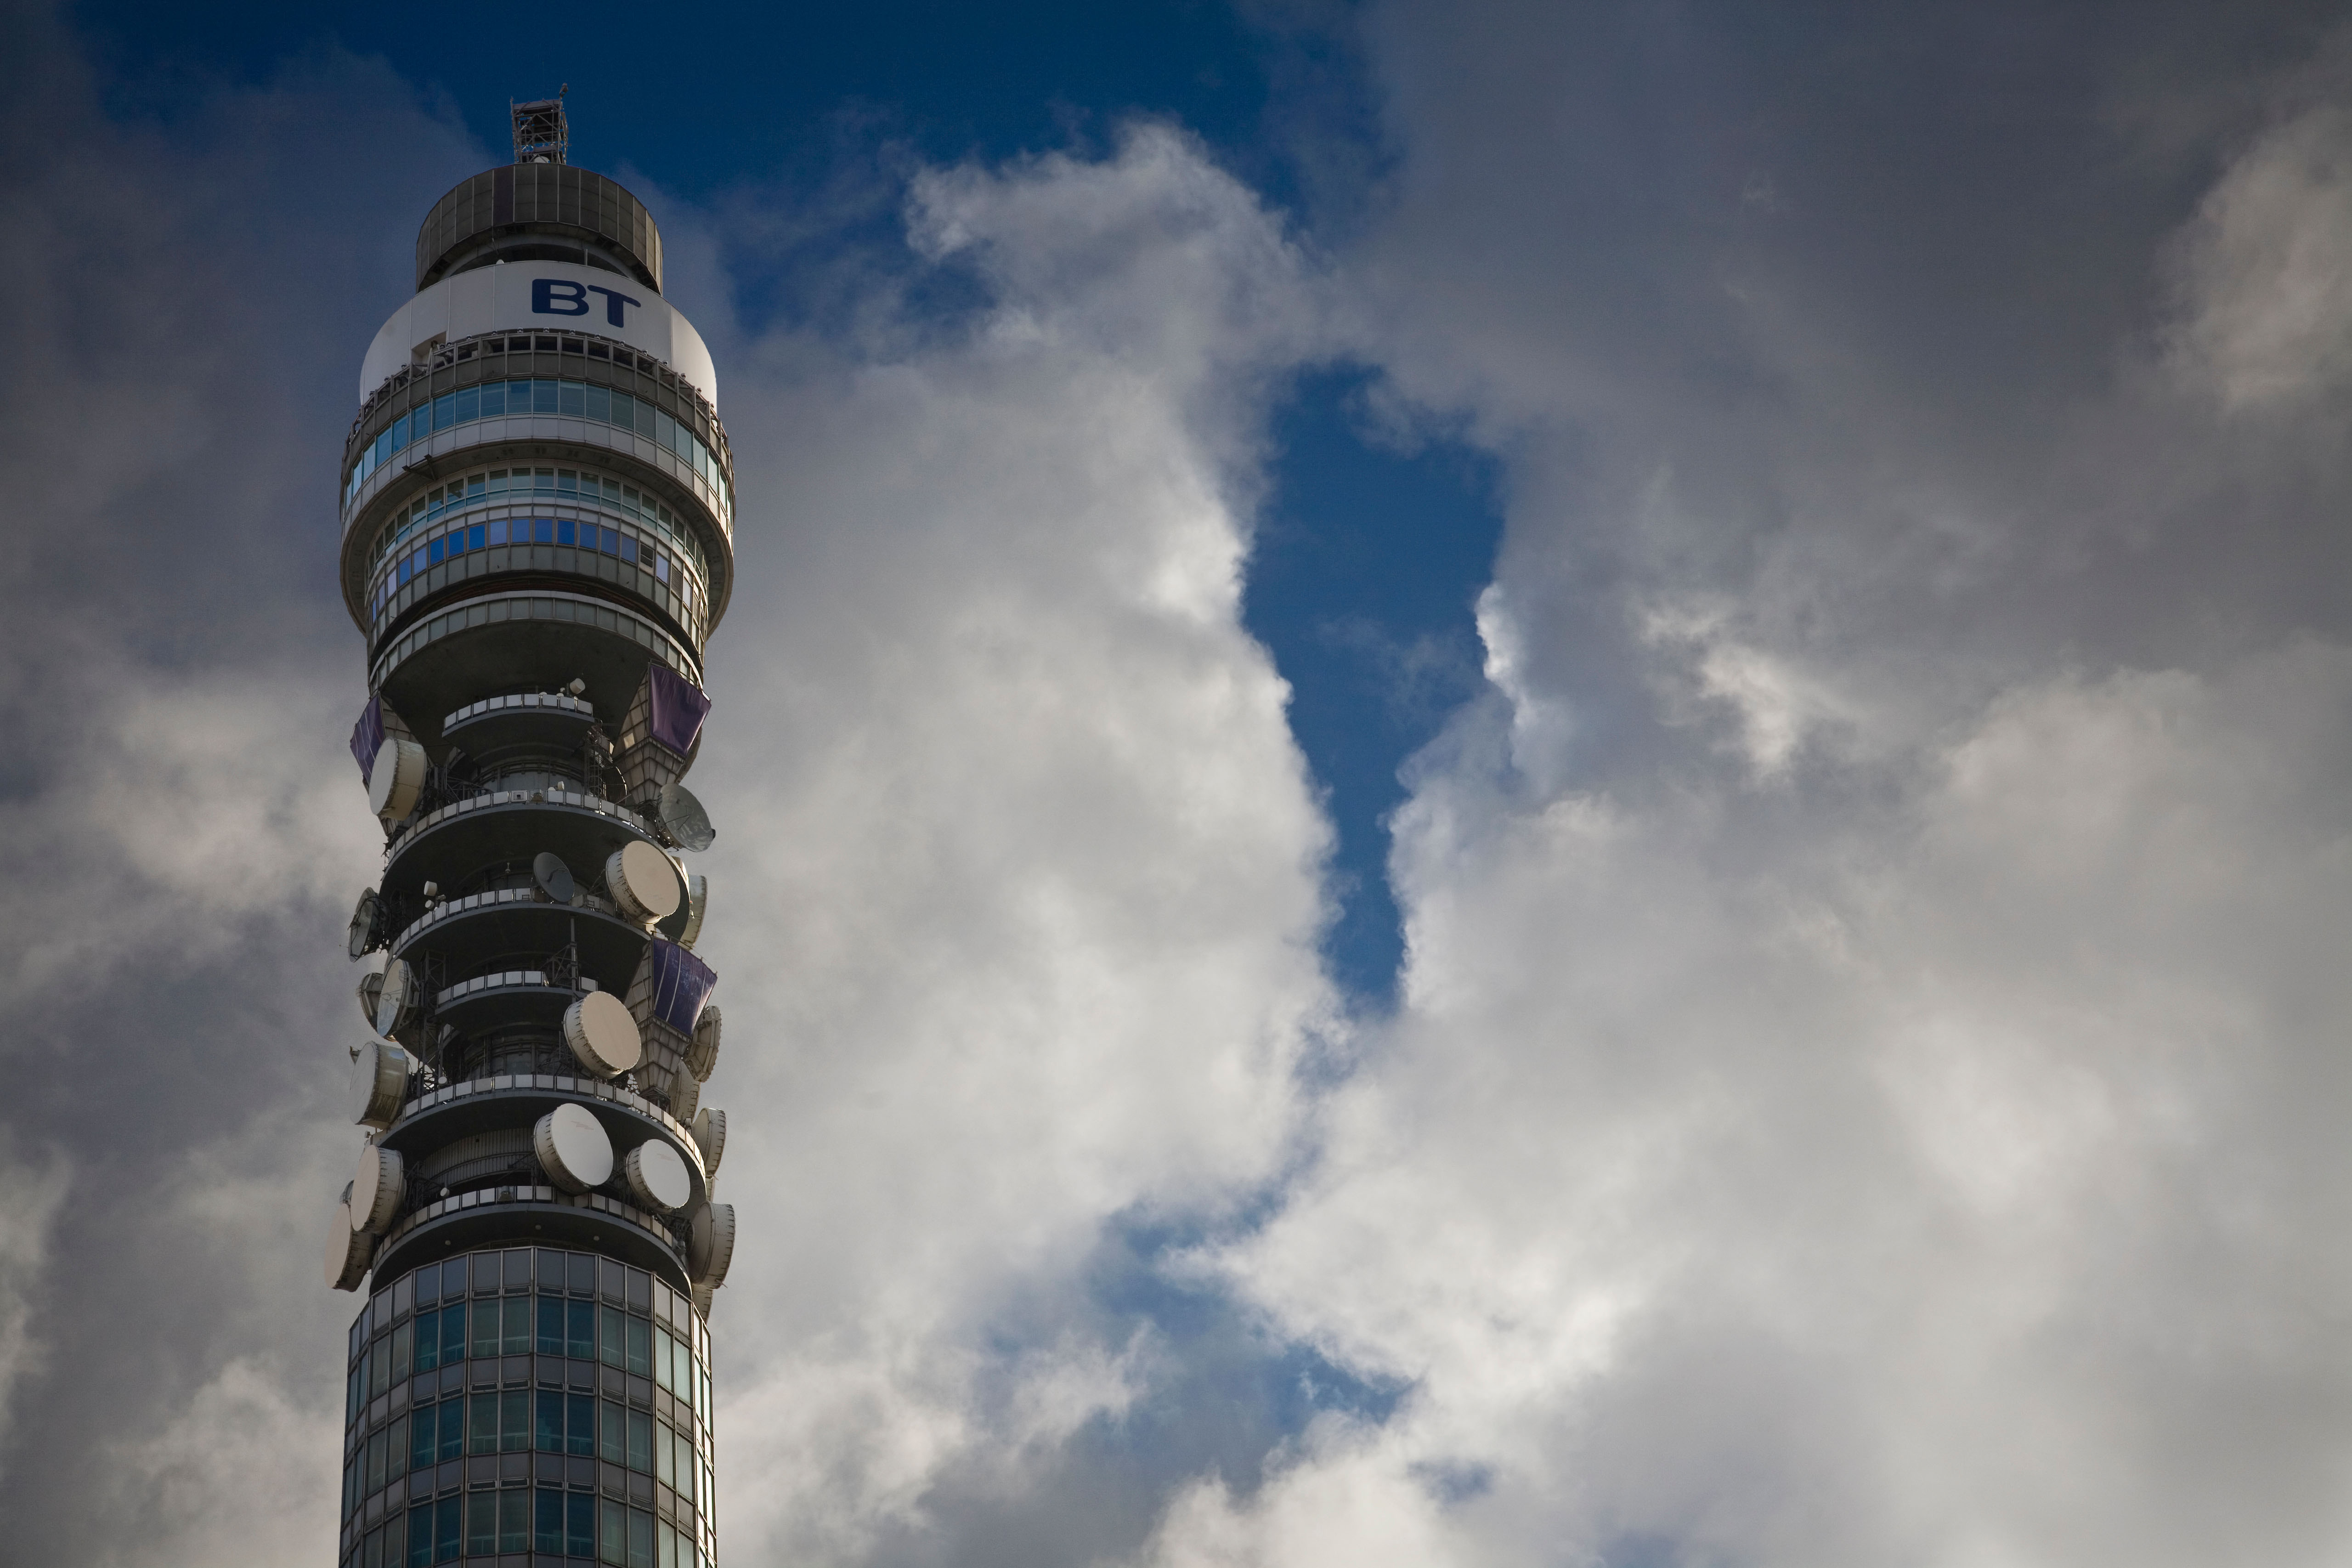 The BT Telecom Tower in London